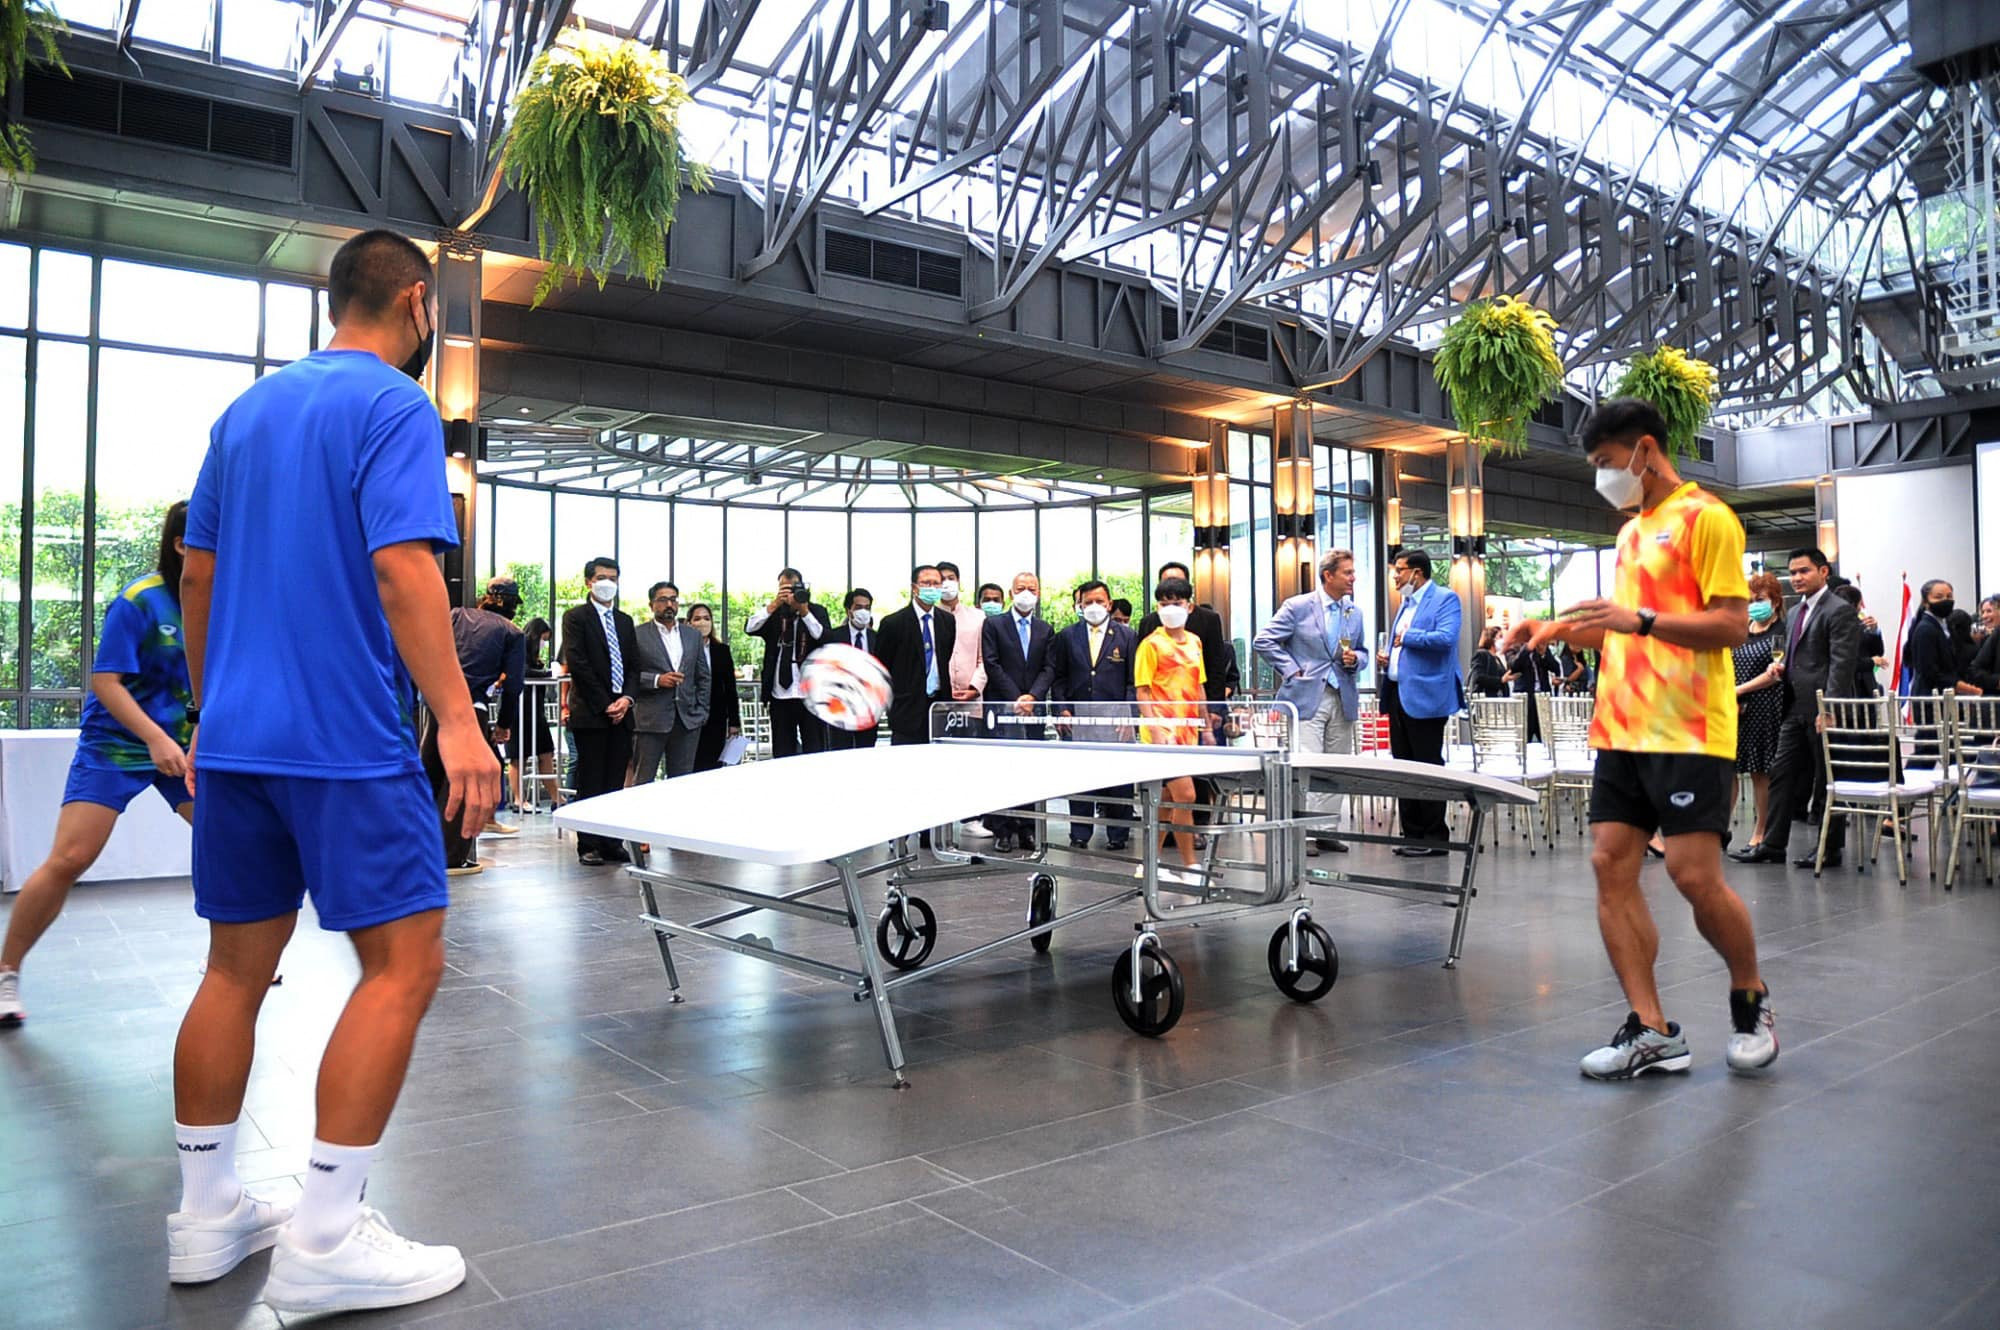 A ceremony was organised to handover the teqball tables to Thailand ©Embassy of Hungary